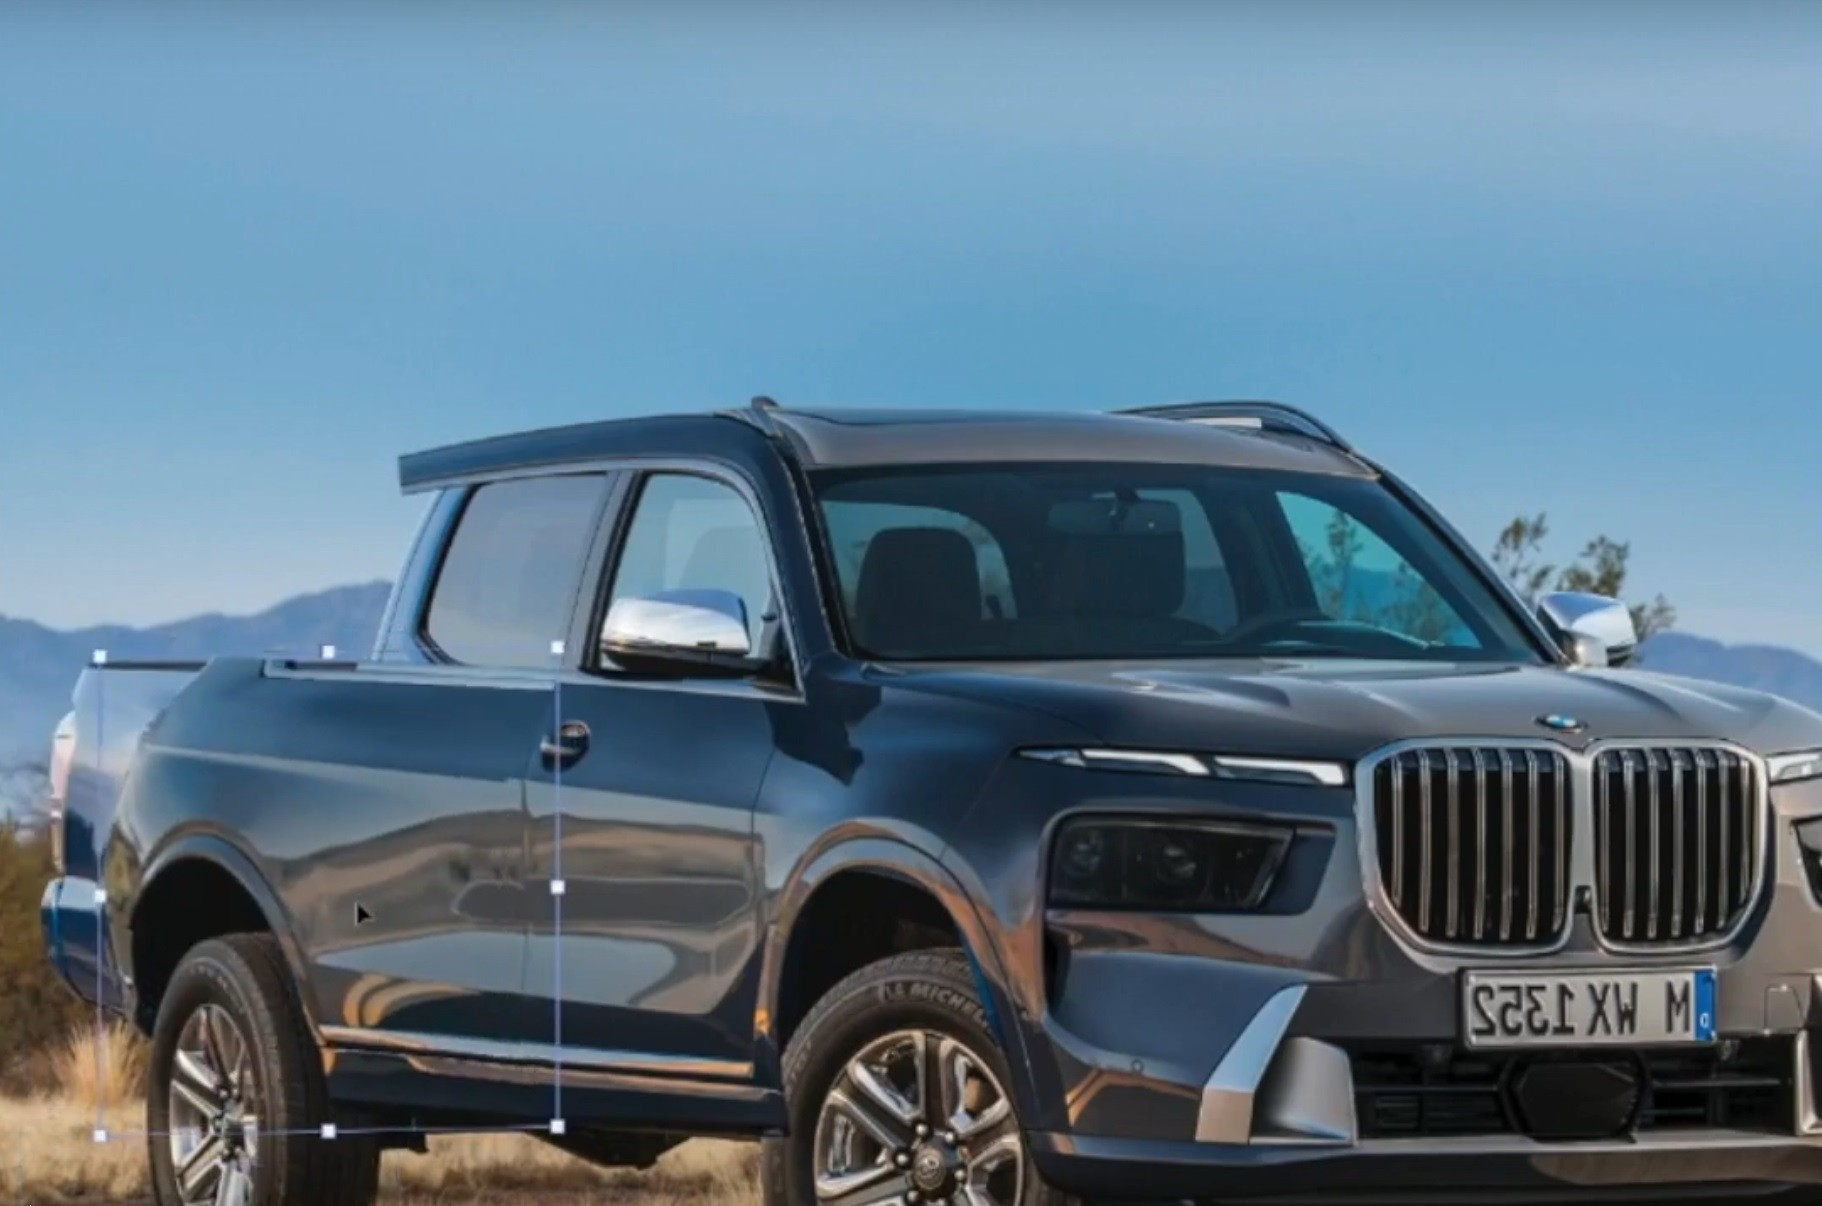 BMW X7 Pickup Imagined, Could It Succeed Where the Smaller Mercedes X